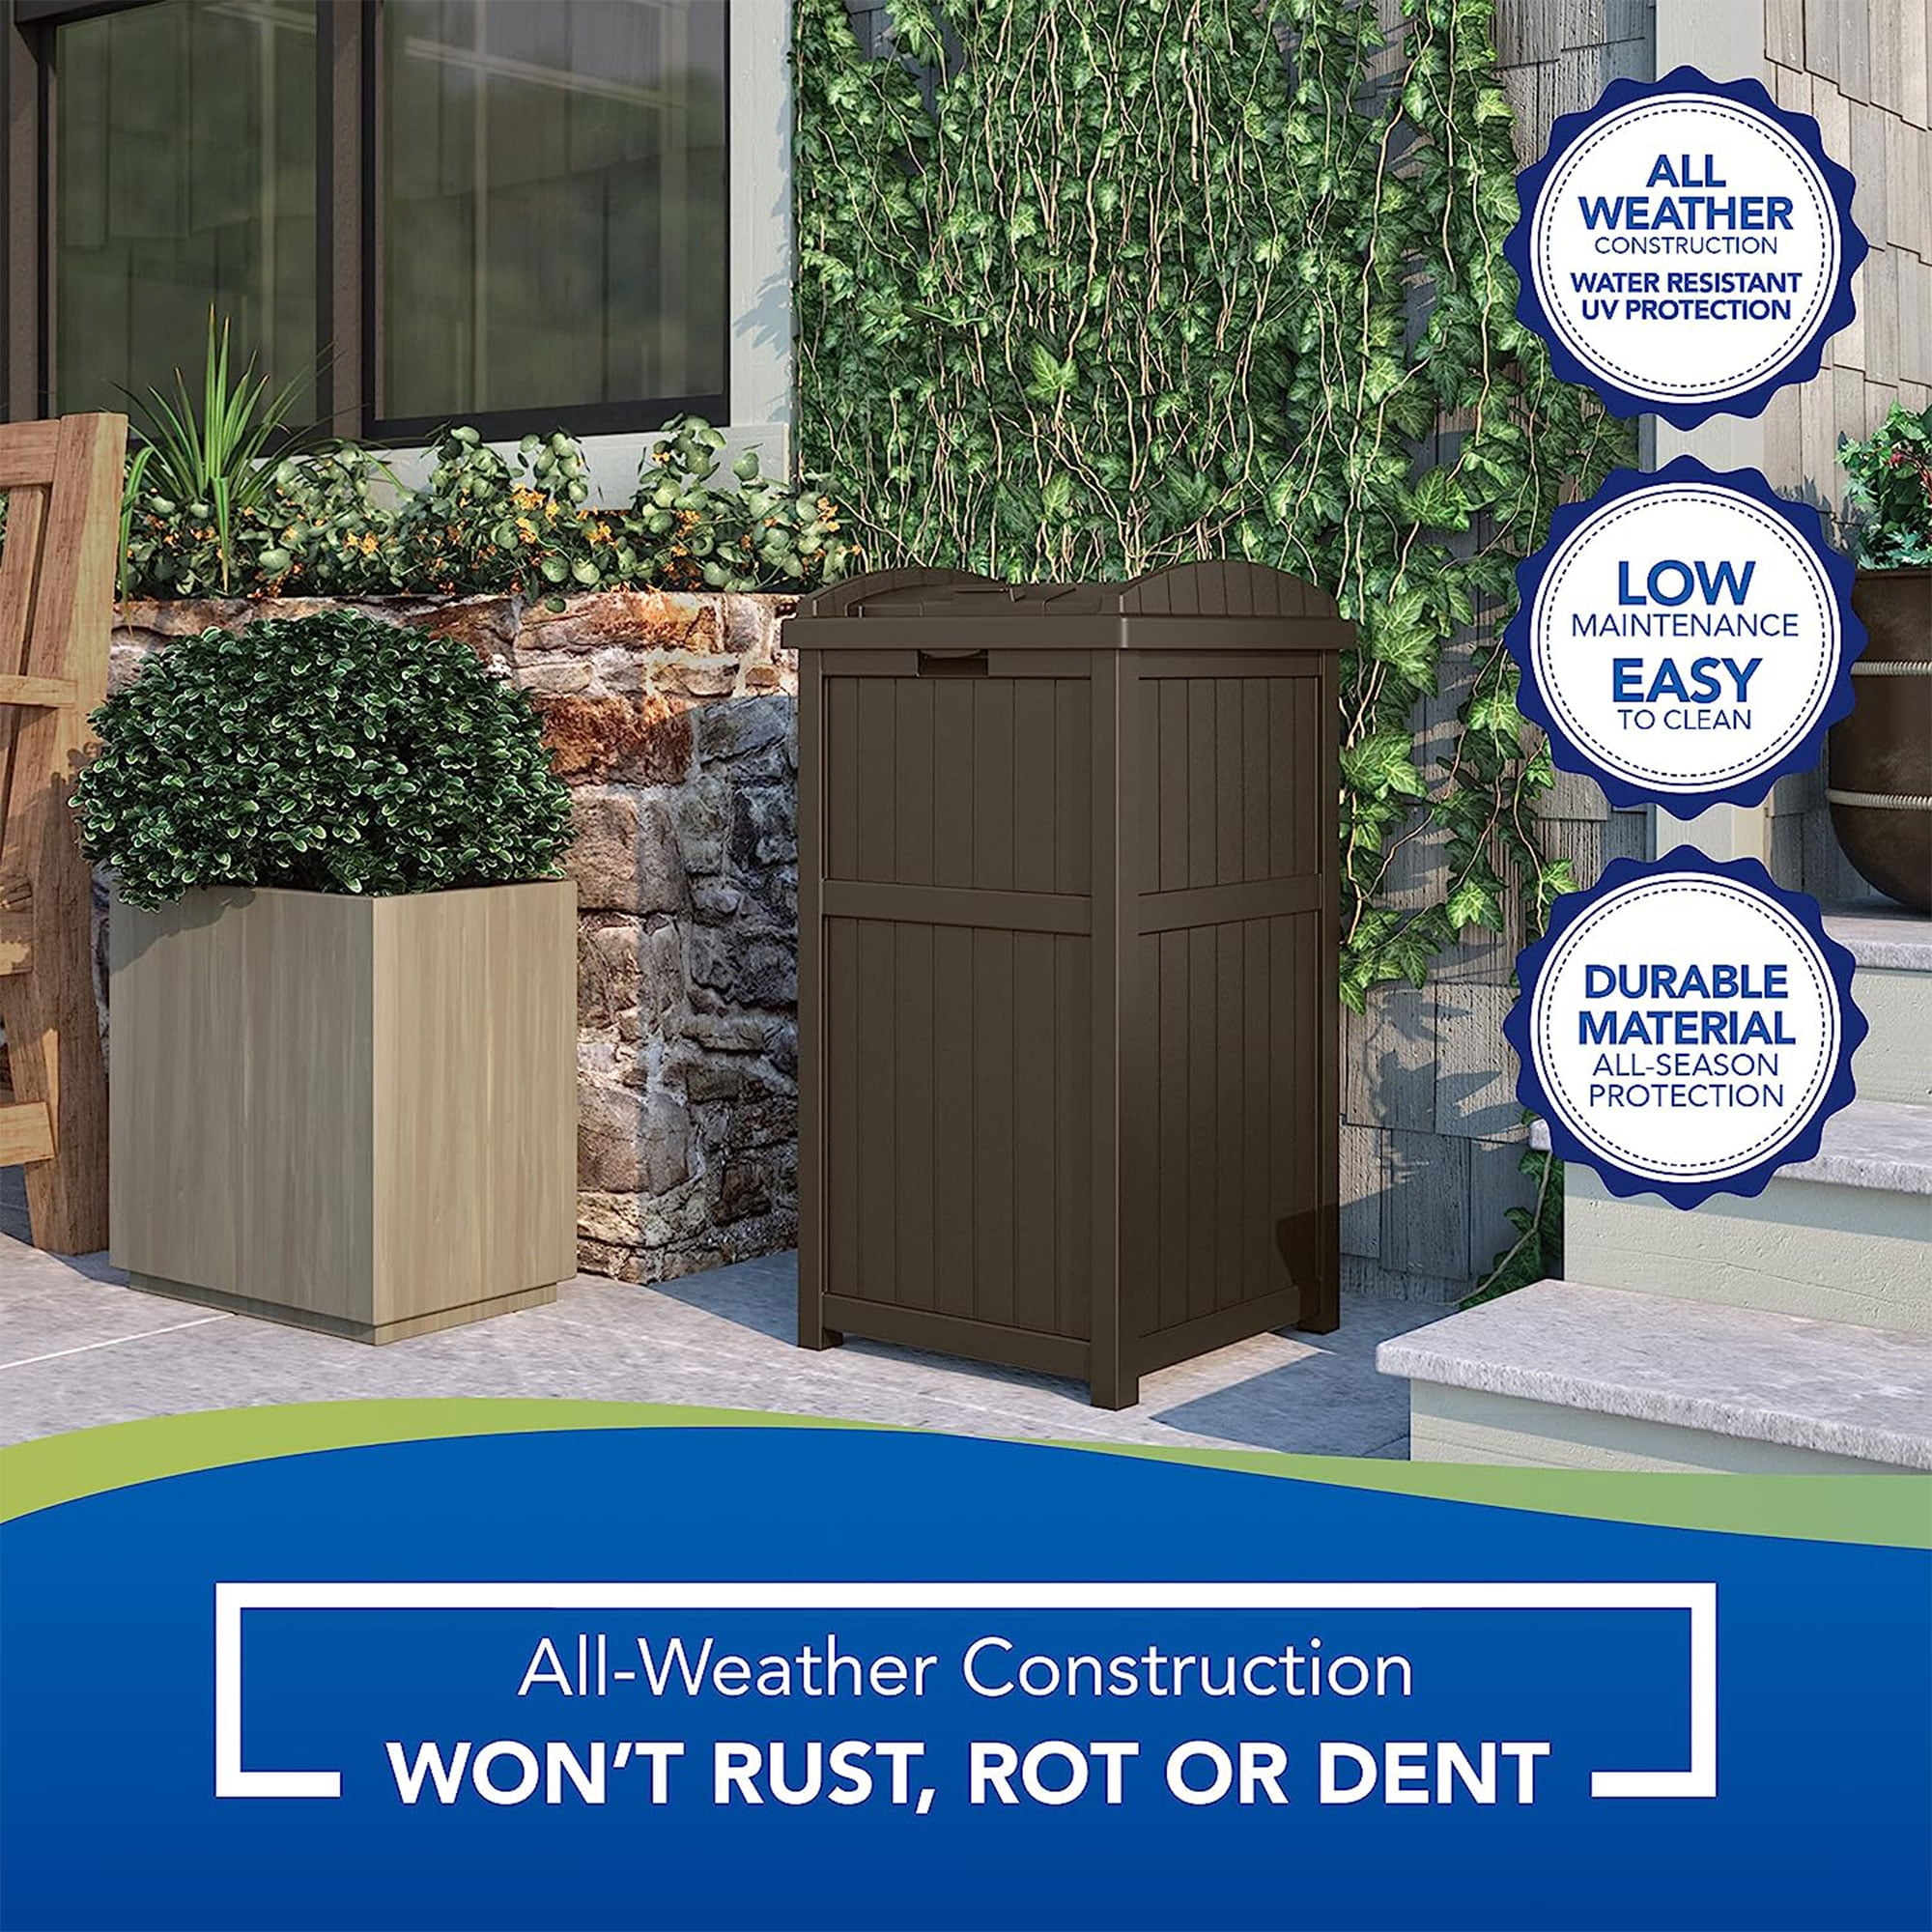 Suncast Plastic Trash Hideaway 30 Gallon Brown Outdoor Trash Can with Lid,  Suitable for Patios, Decks and Backyards